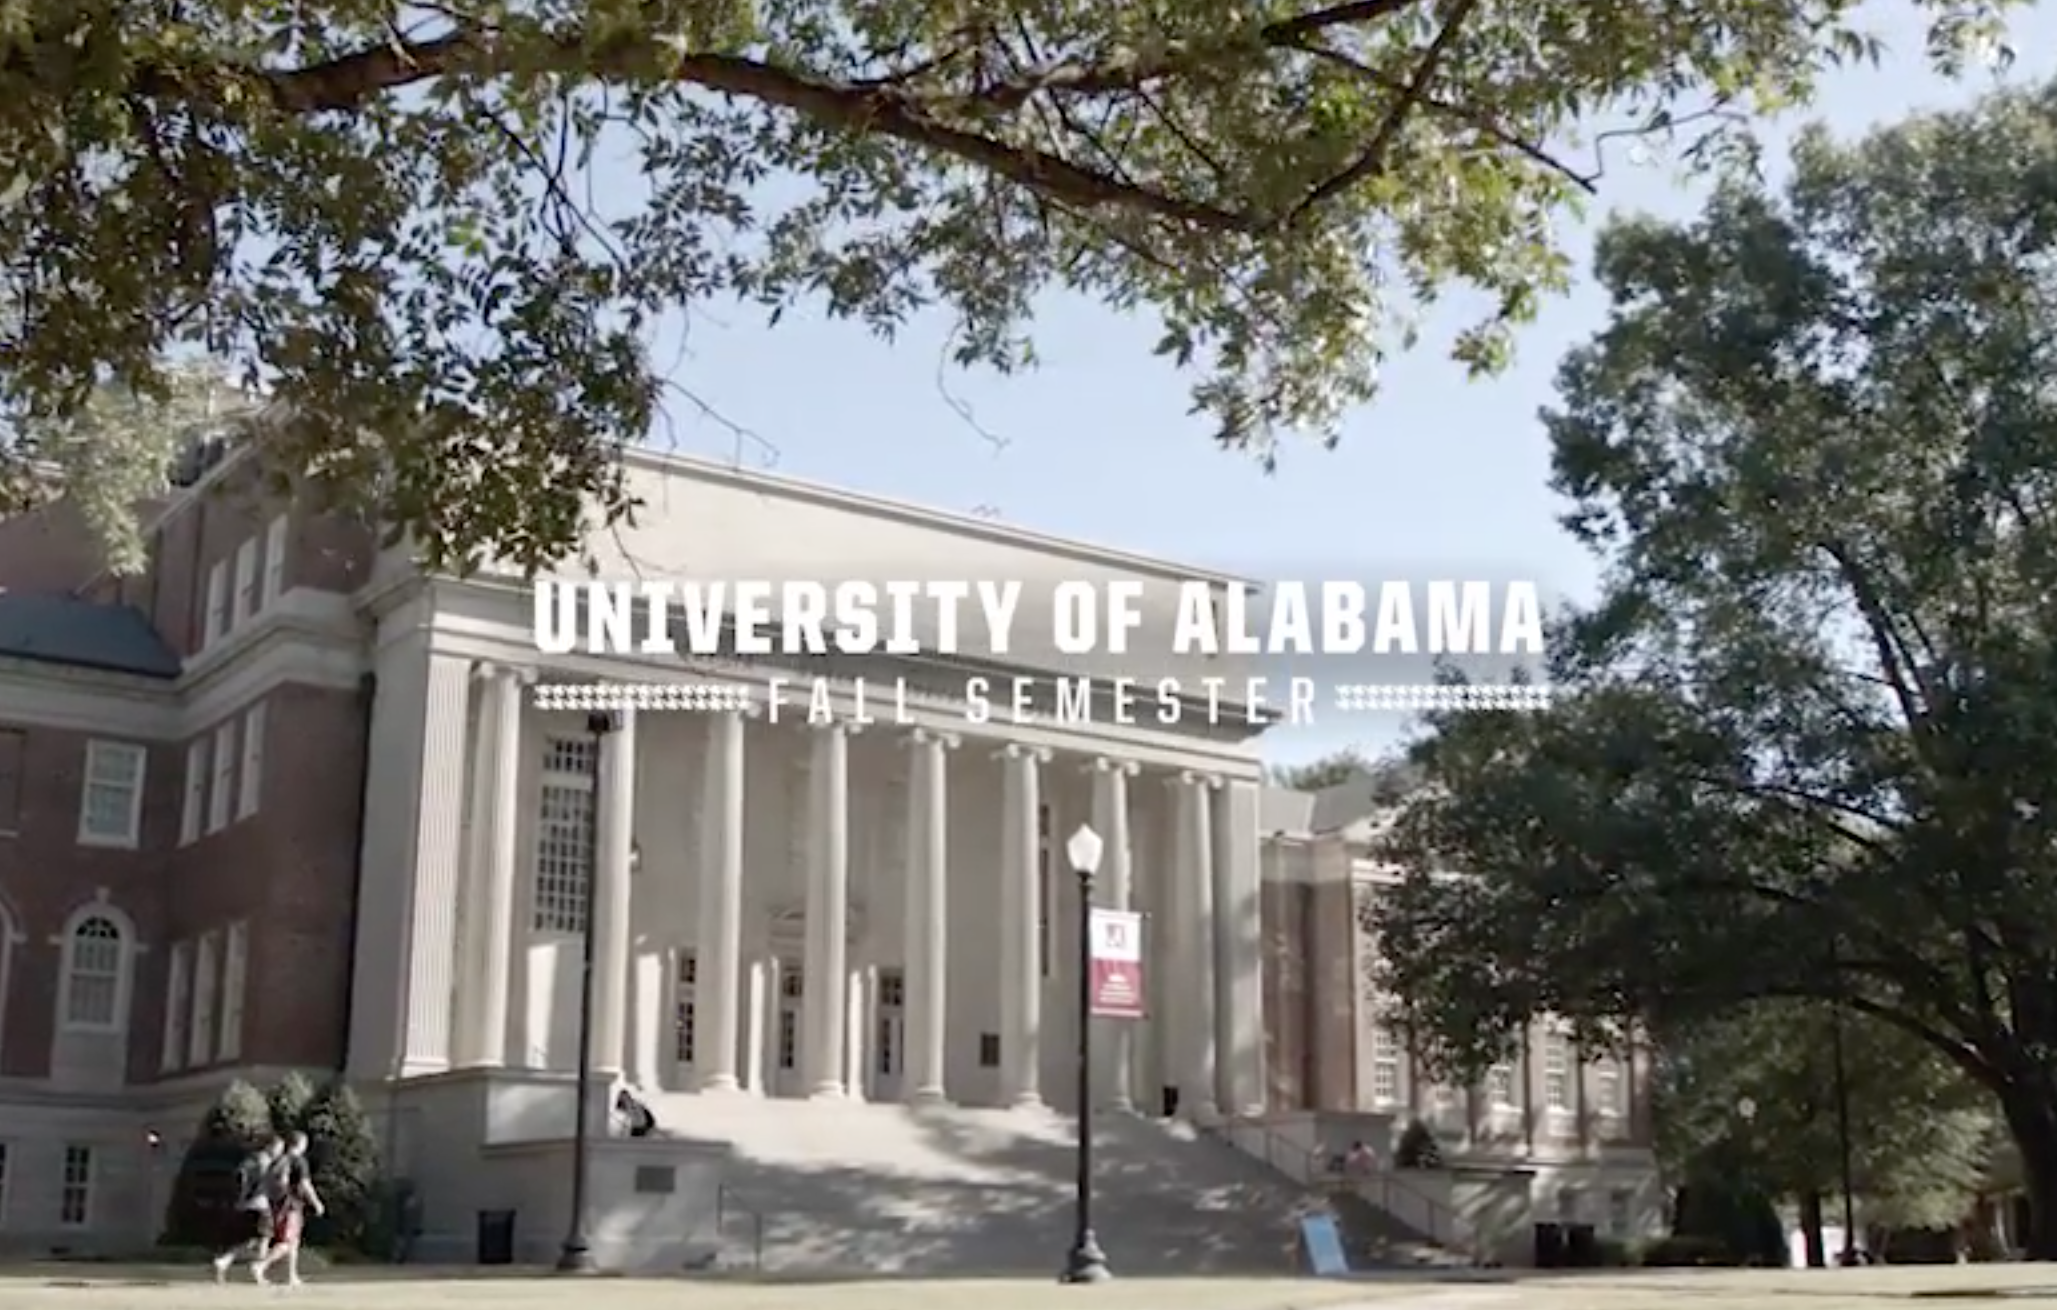 UA Campus, Rece Davis Star in Playoff Commercial